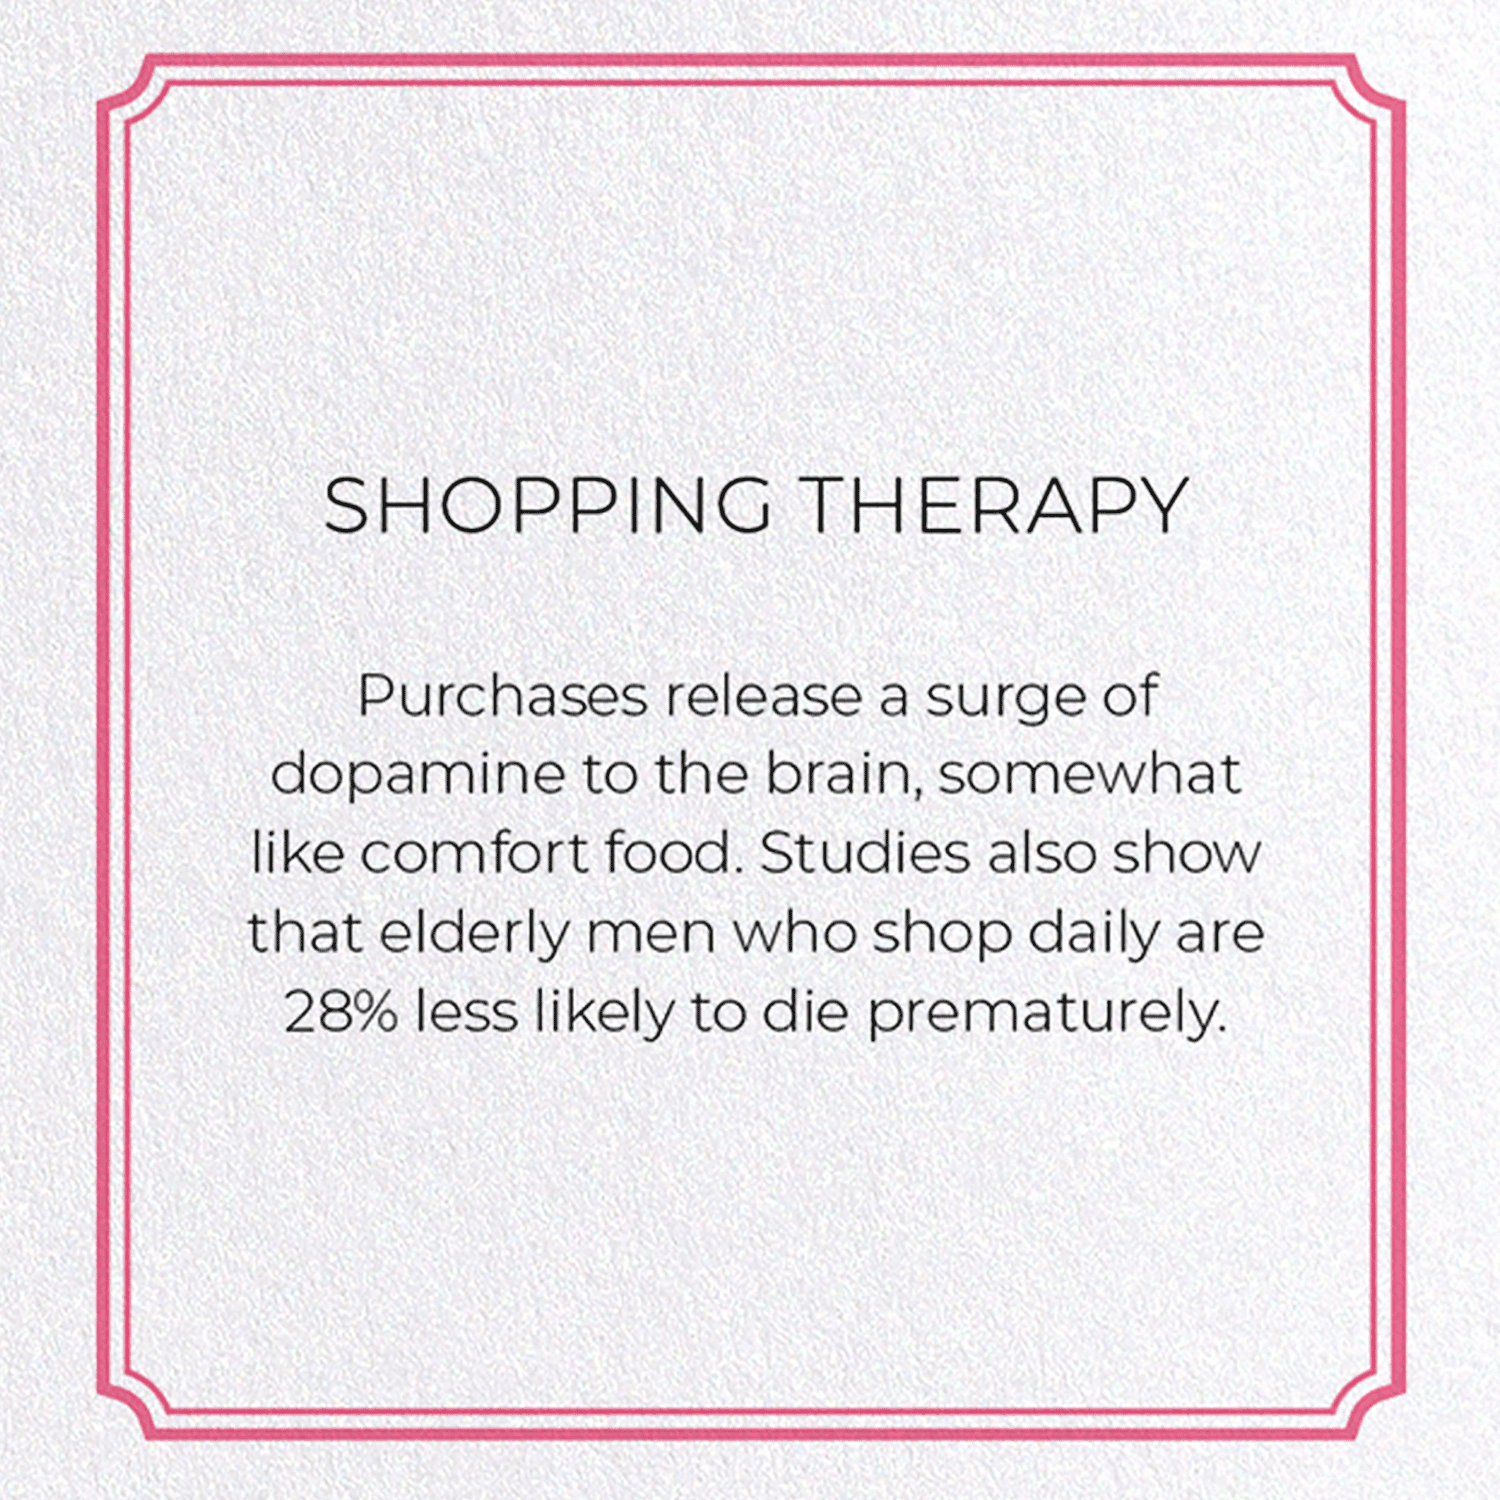 SHOPPING THERAPY